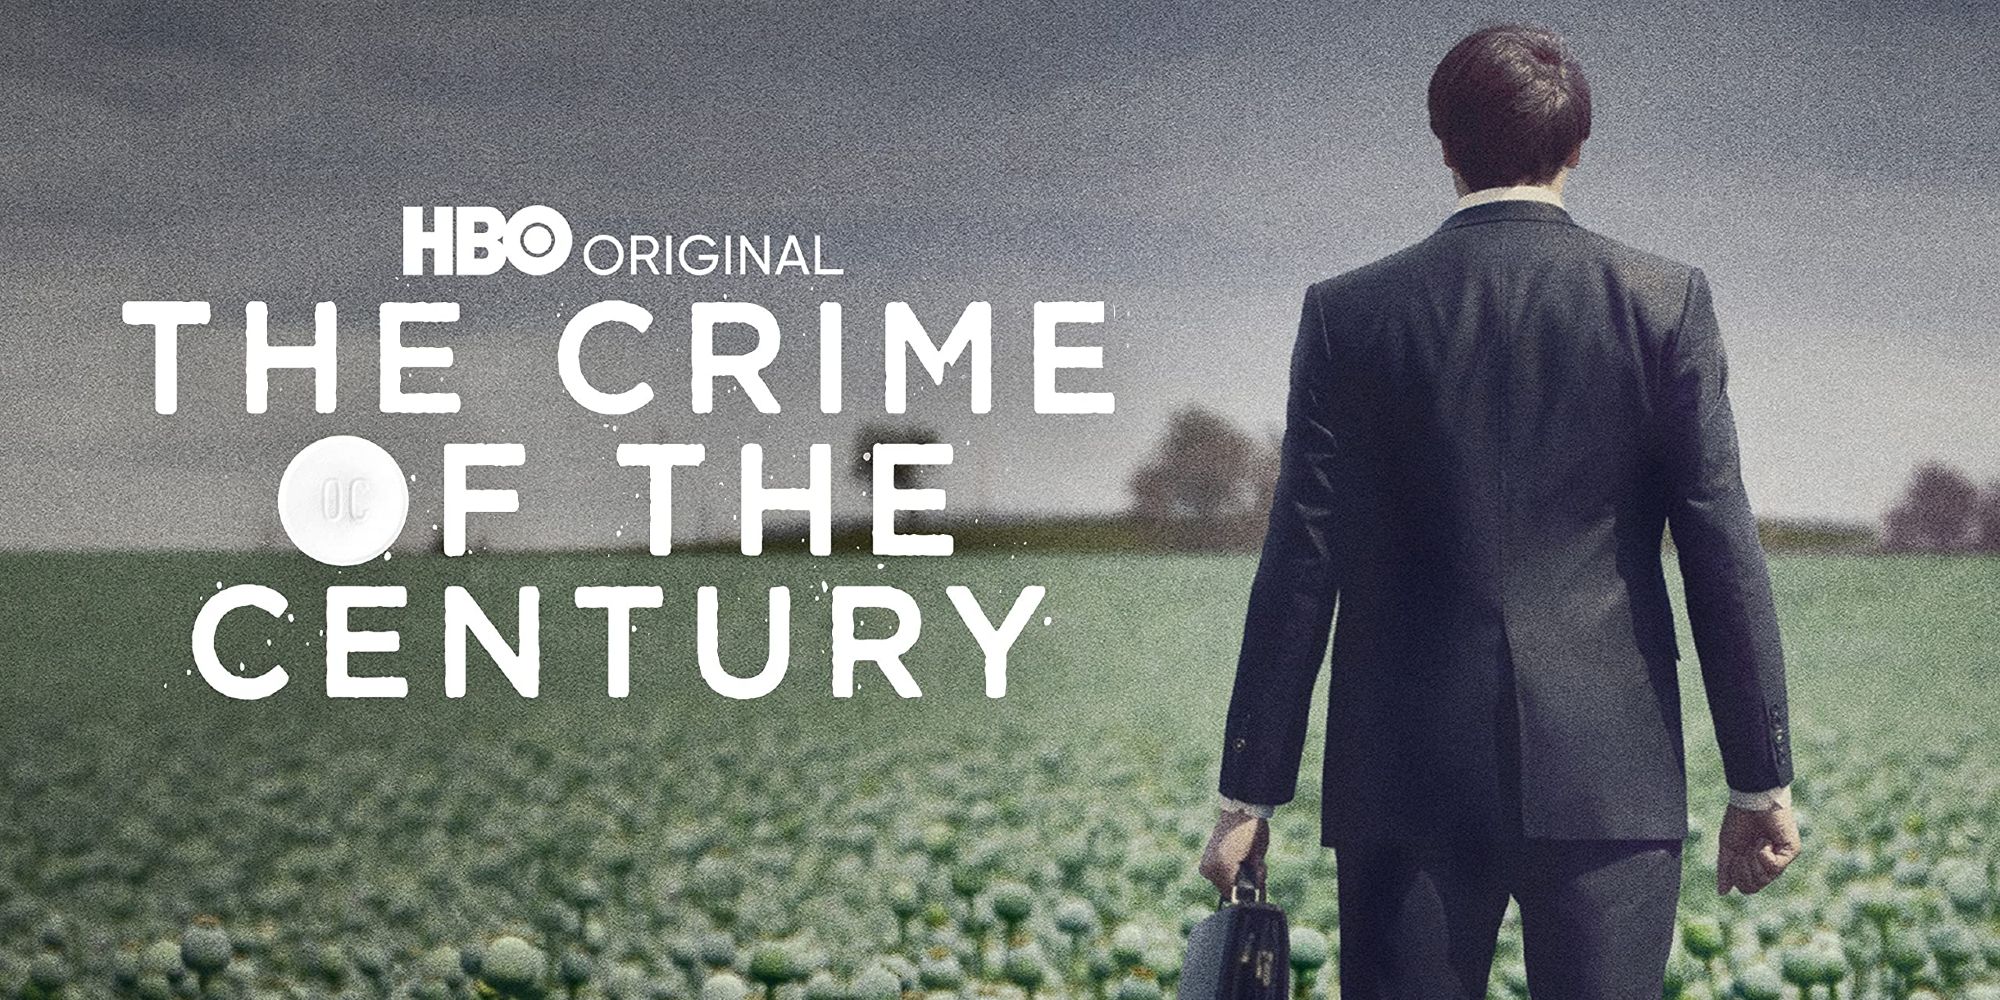 The-Crime-of-the-Century_Teaser-image-featuring-a-business-man-standing-in-a-field-of-opium-poppies-1